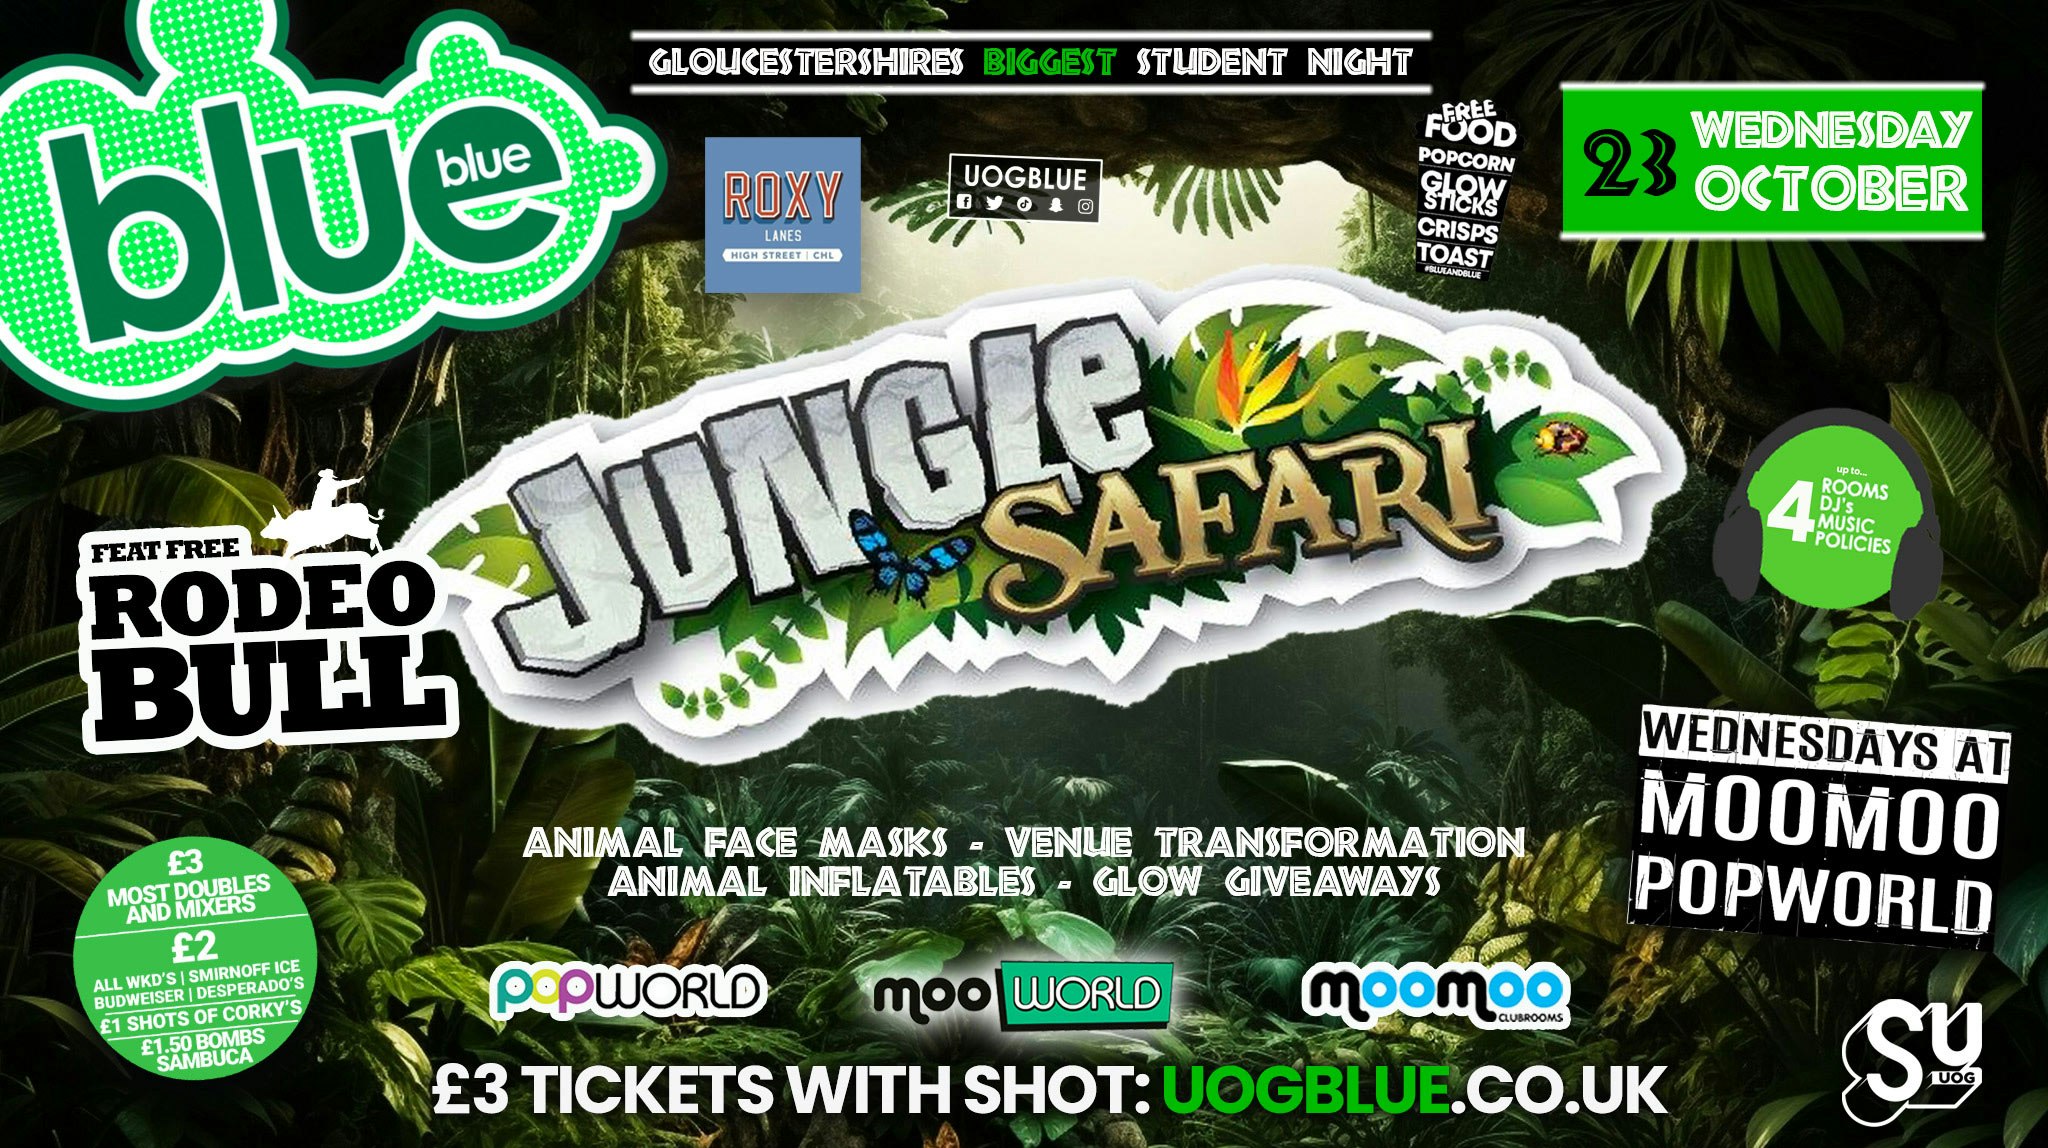 Blue and Blue ﻿🐾 SAFARI & JUNGLE PARTY feat RODEO BULL!!! 🐾 Gloucestershire’s Biggest Student Night